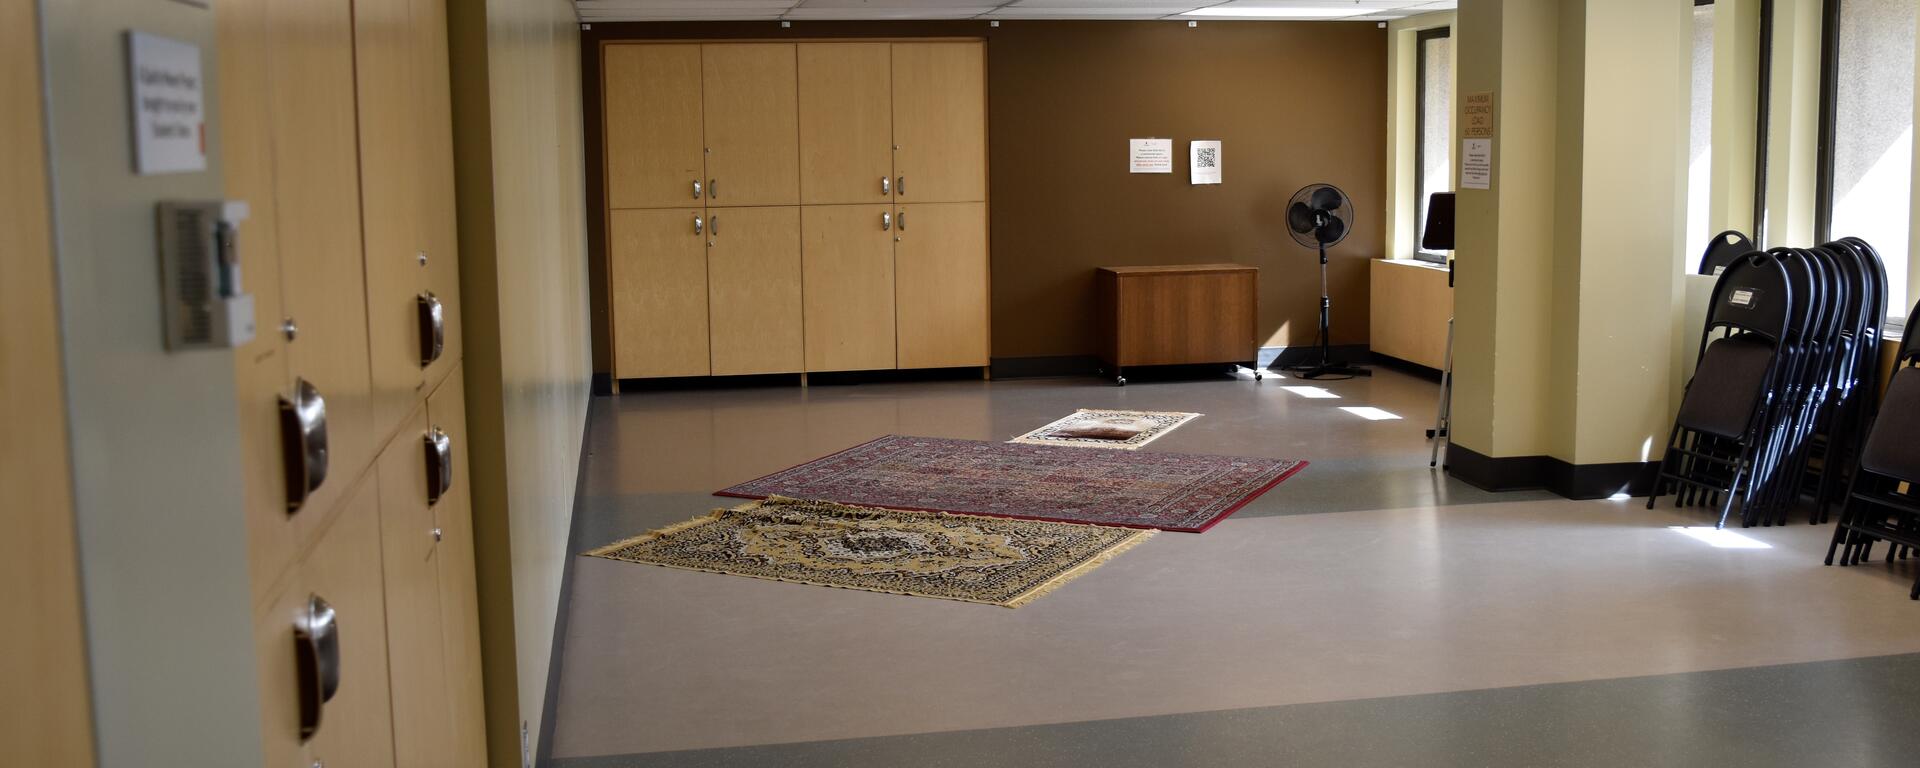 a room with windows, cabinets, and prayer mats on the floor